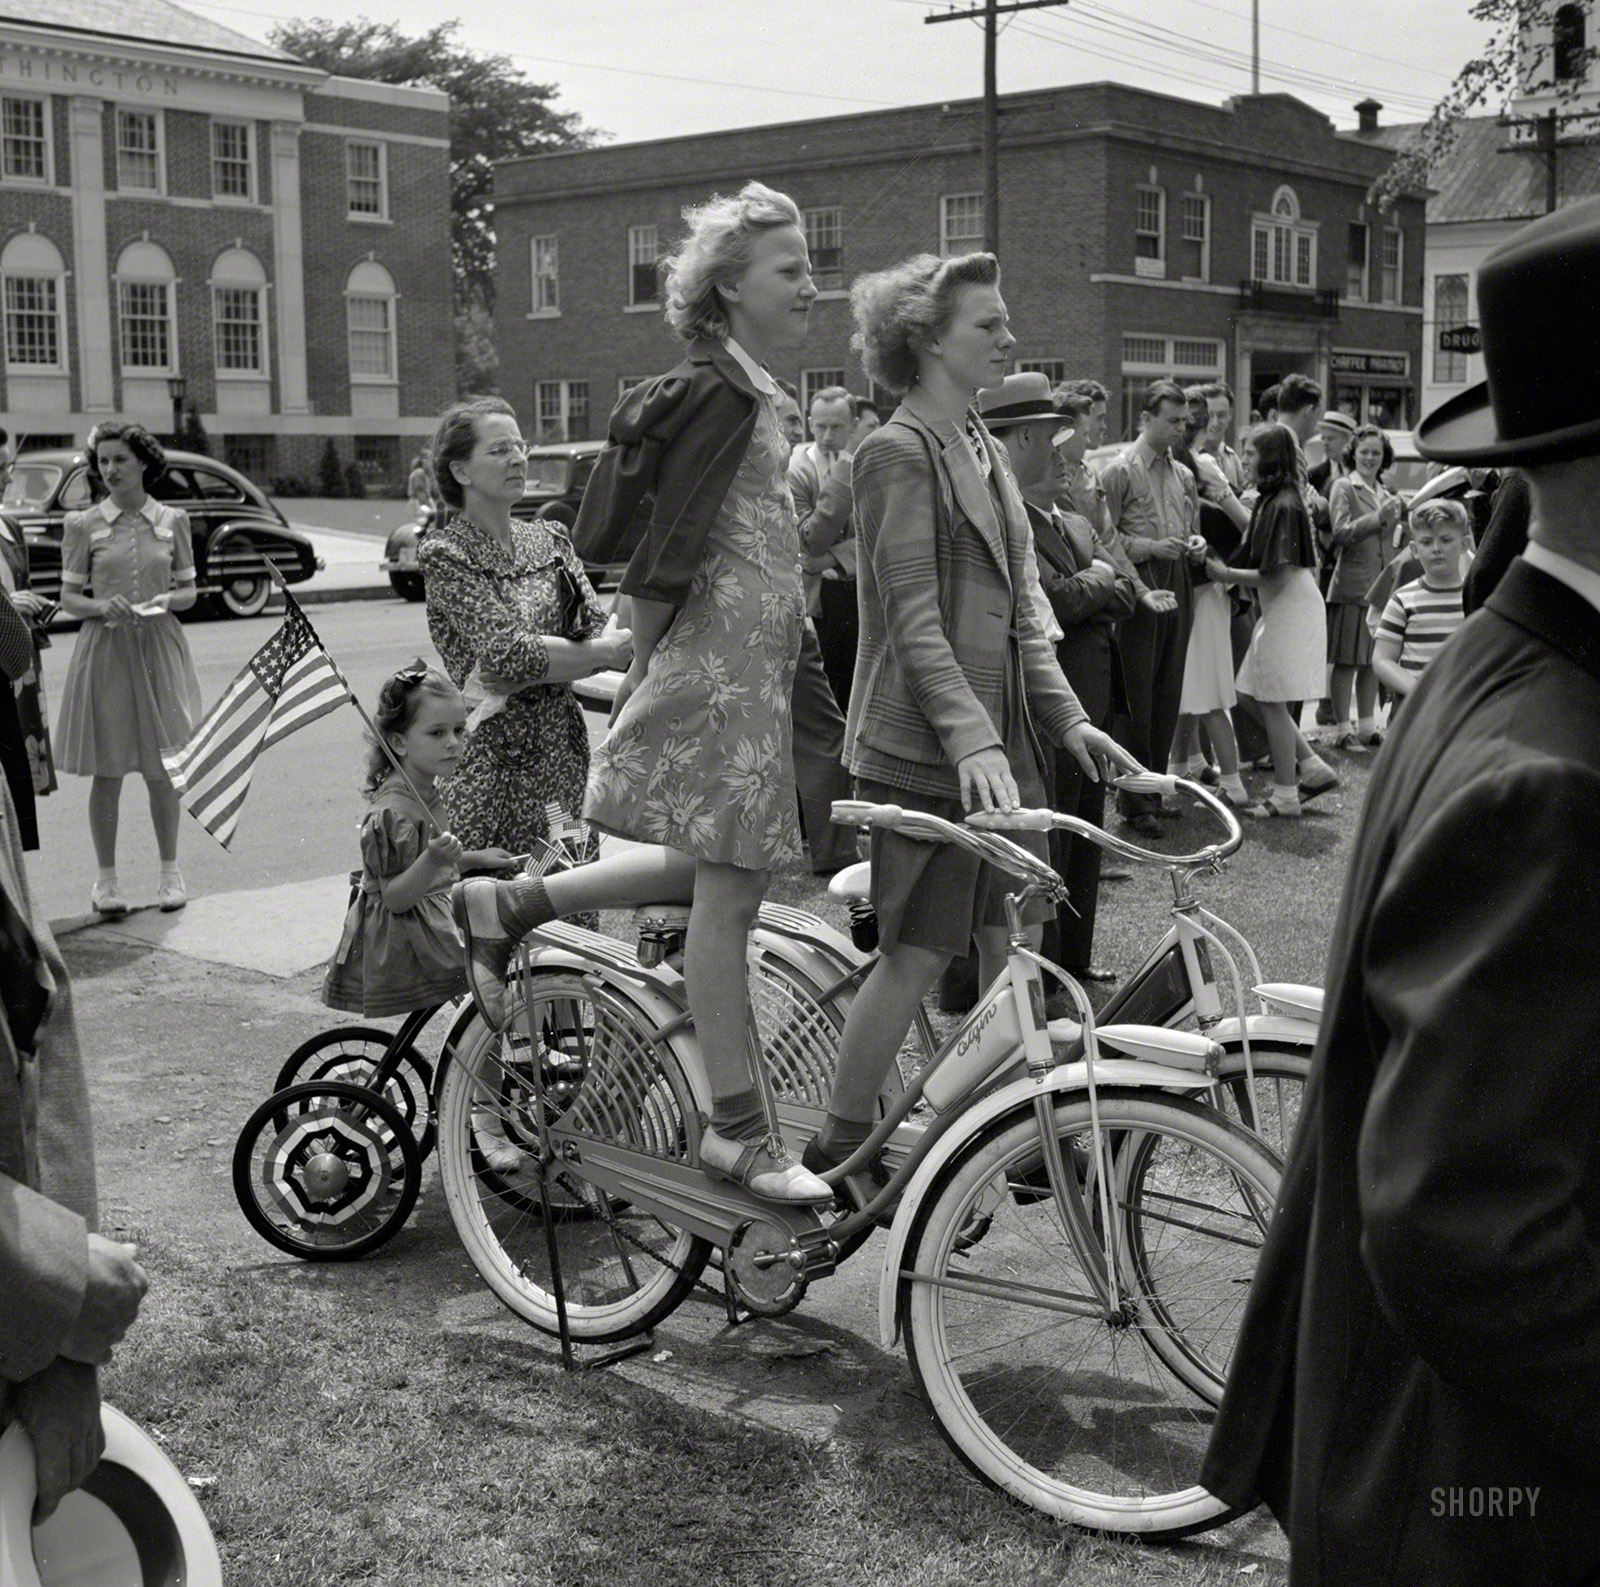 May 1942. "Southington, Connecticut. Schoolchildren staging a patriotic demonstration." Which includes Synchronized Stationary Bikes. Photo by Fenno Jacobs for the Office of War Information. View full size.